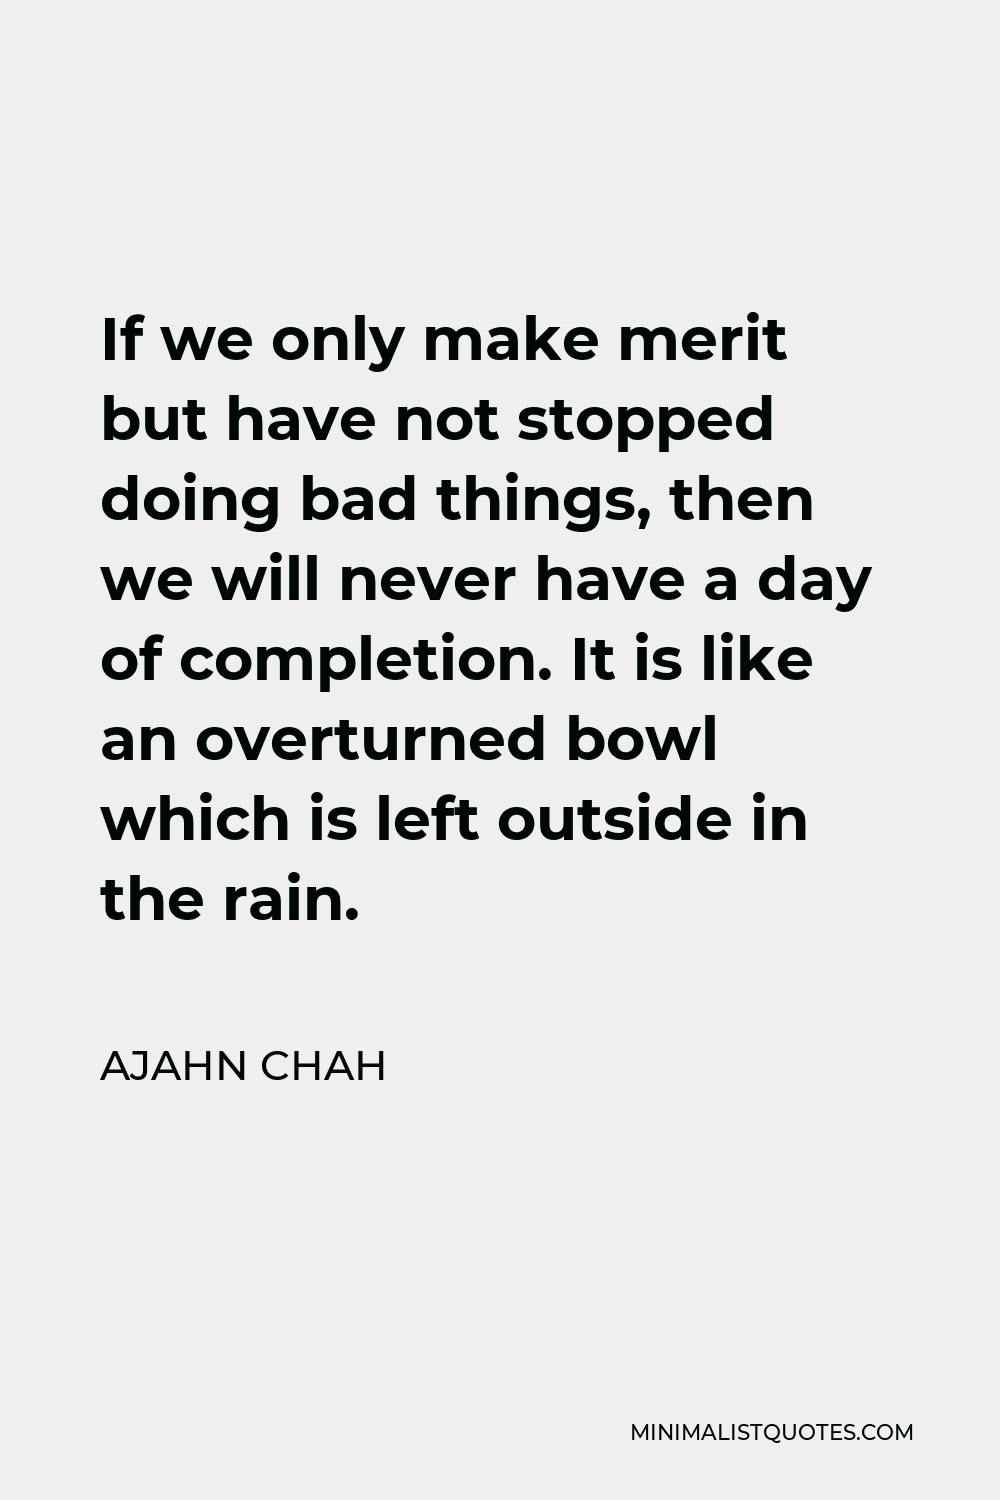 Ajahn Chah Quote - If we only make merit but have not stopped doing bad things, then we will never have a day of completion. It is like an overturned bowl which is left outside in the rain.